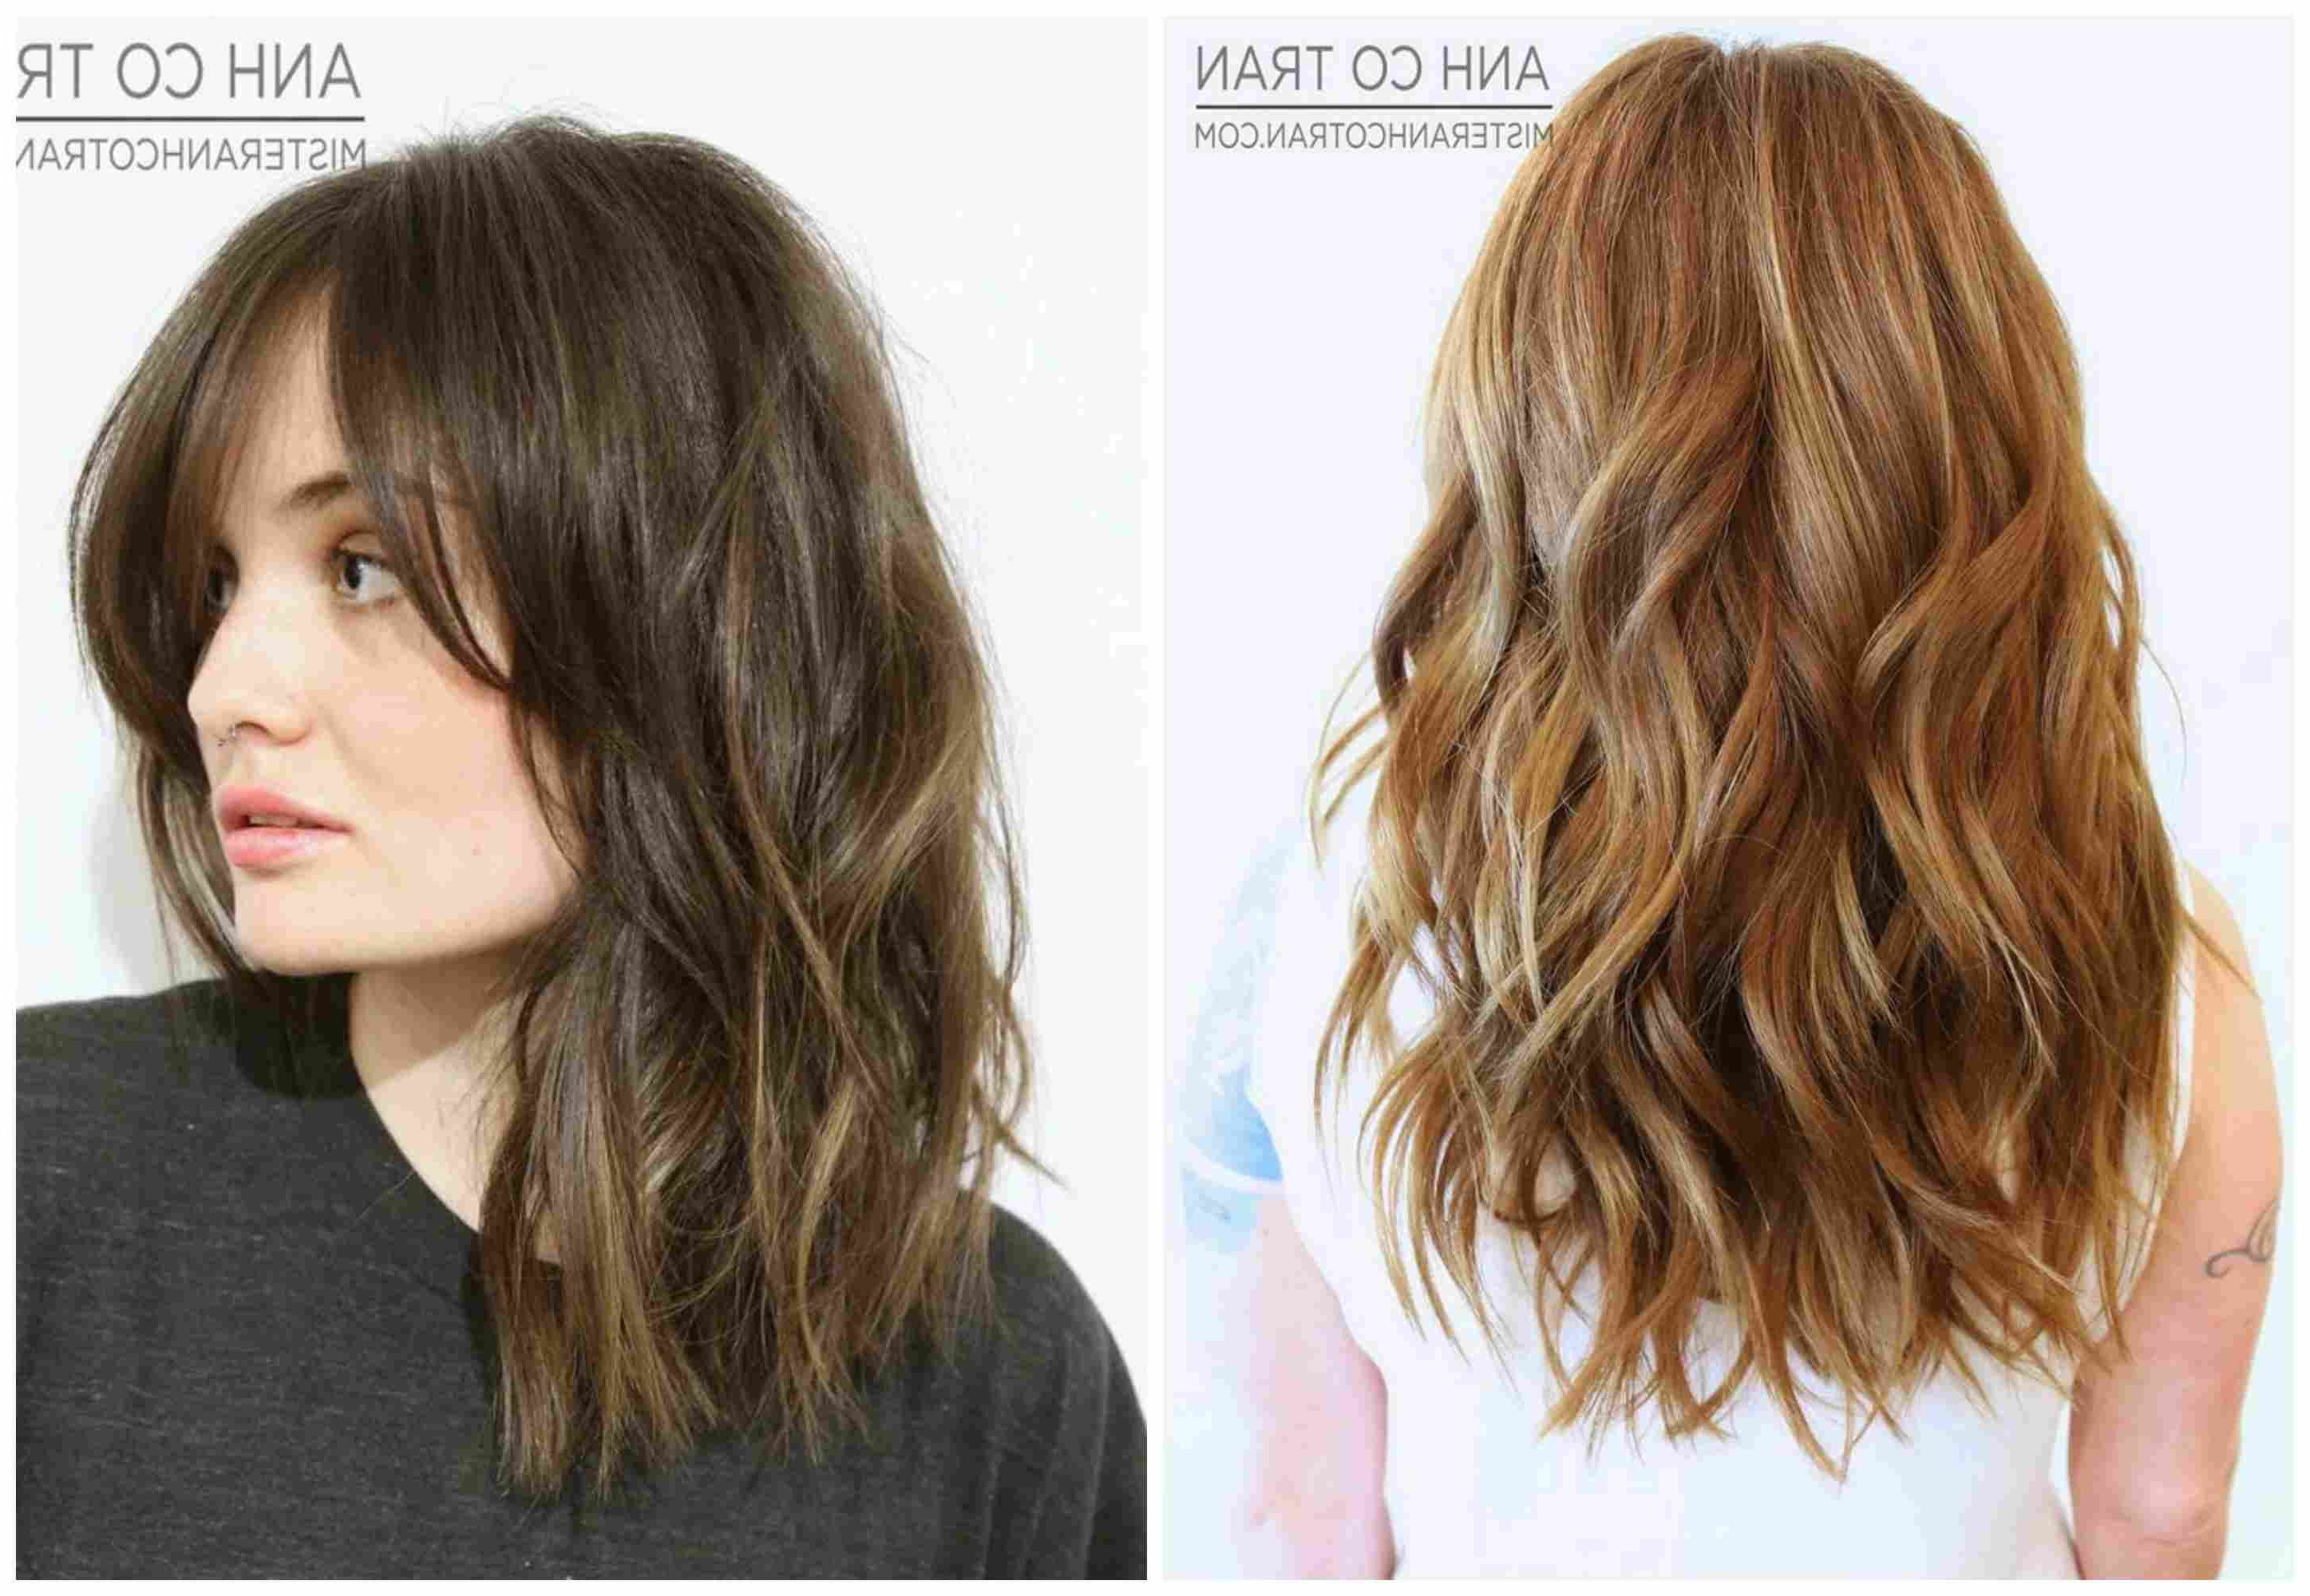 Current Long Waves Hairstyles Regarding Long Wavy Hair: The Best Cuts, Colors And Styles (View 5 of 20)